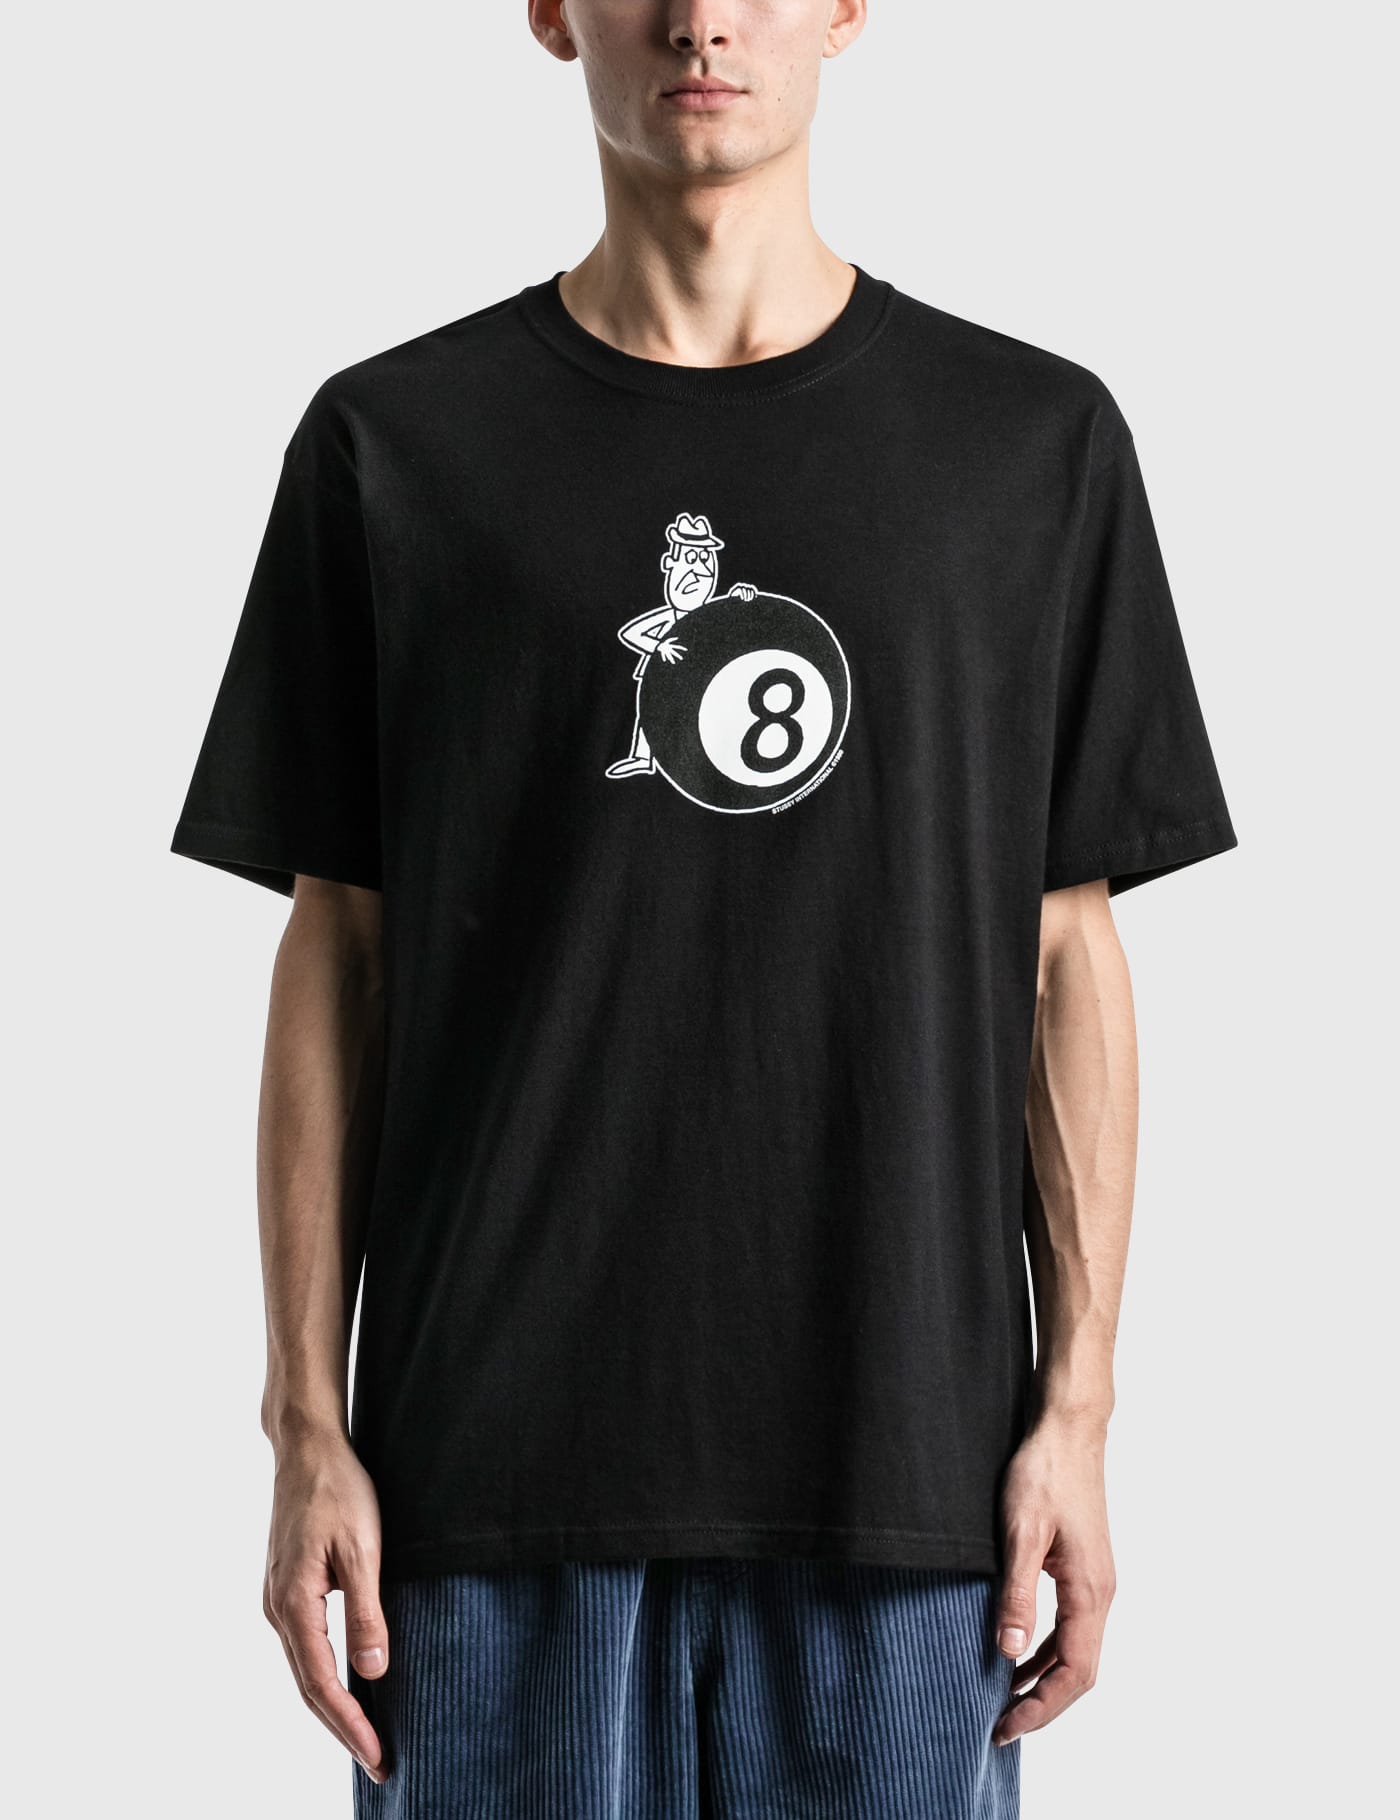 Stüssy - Behind The 8 Ball T-Shirt | HBX - Globally Curated 